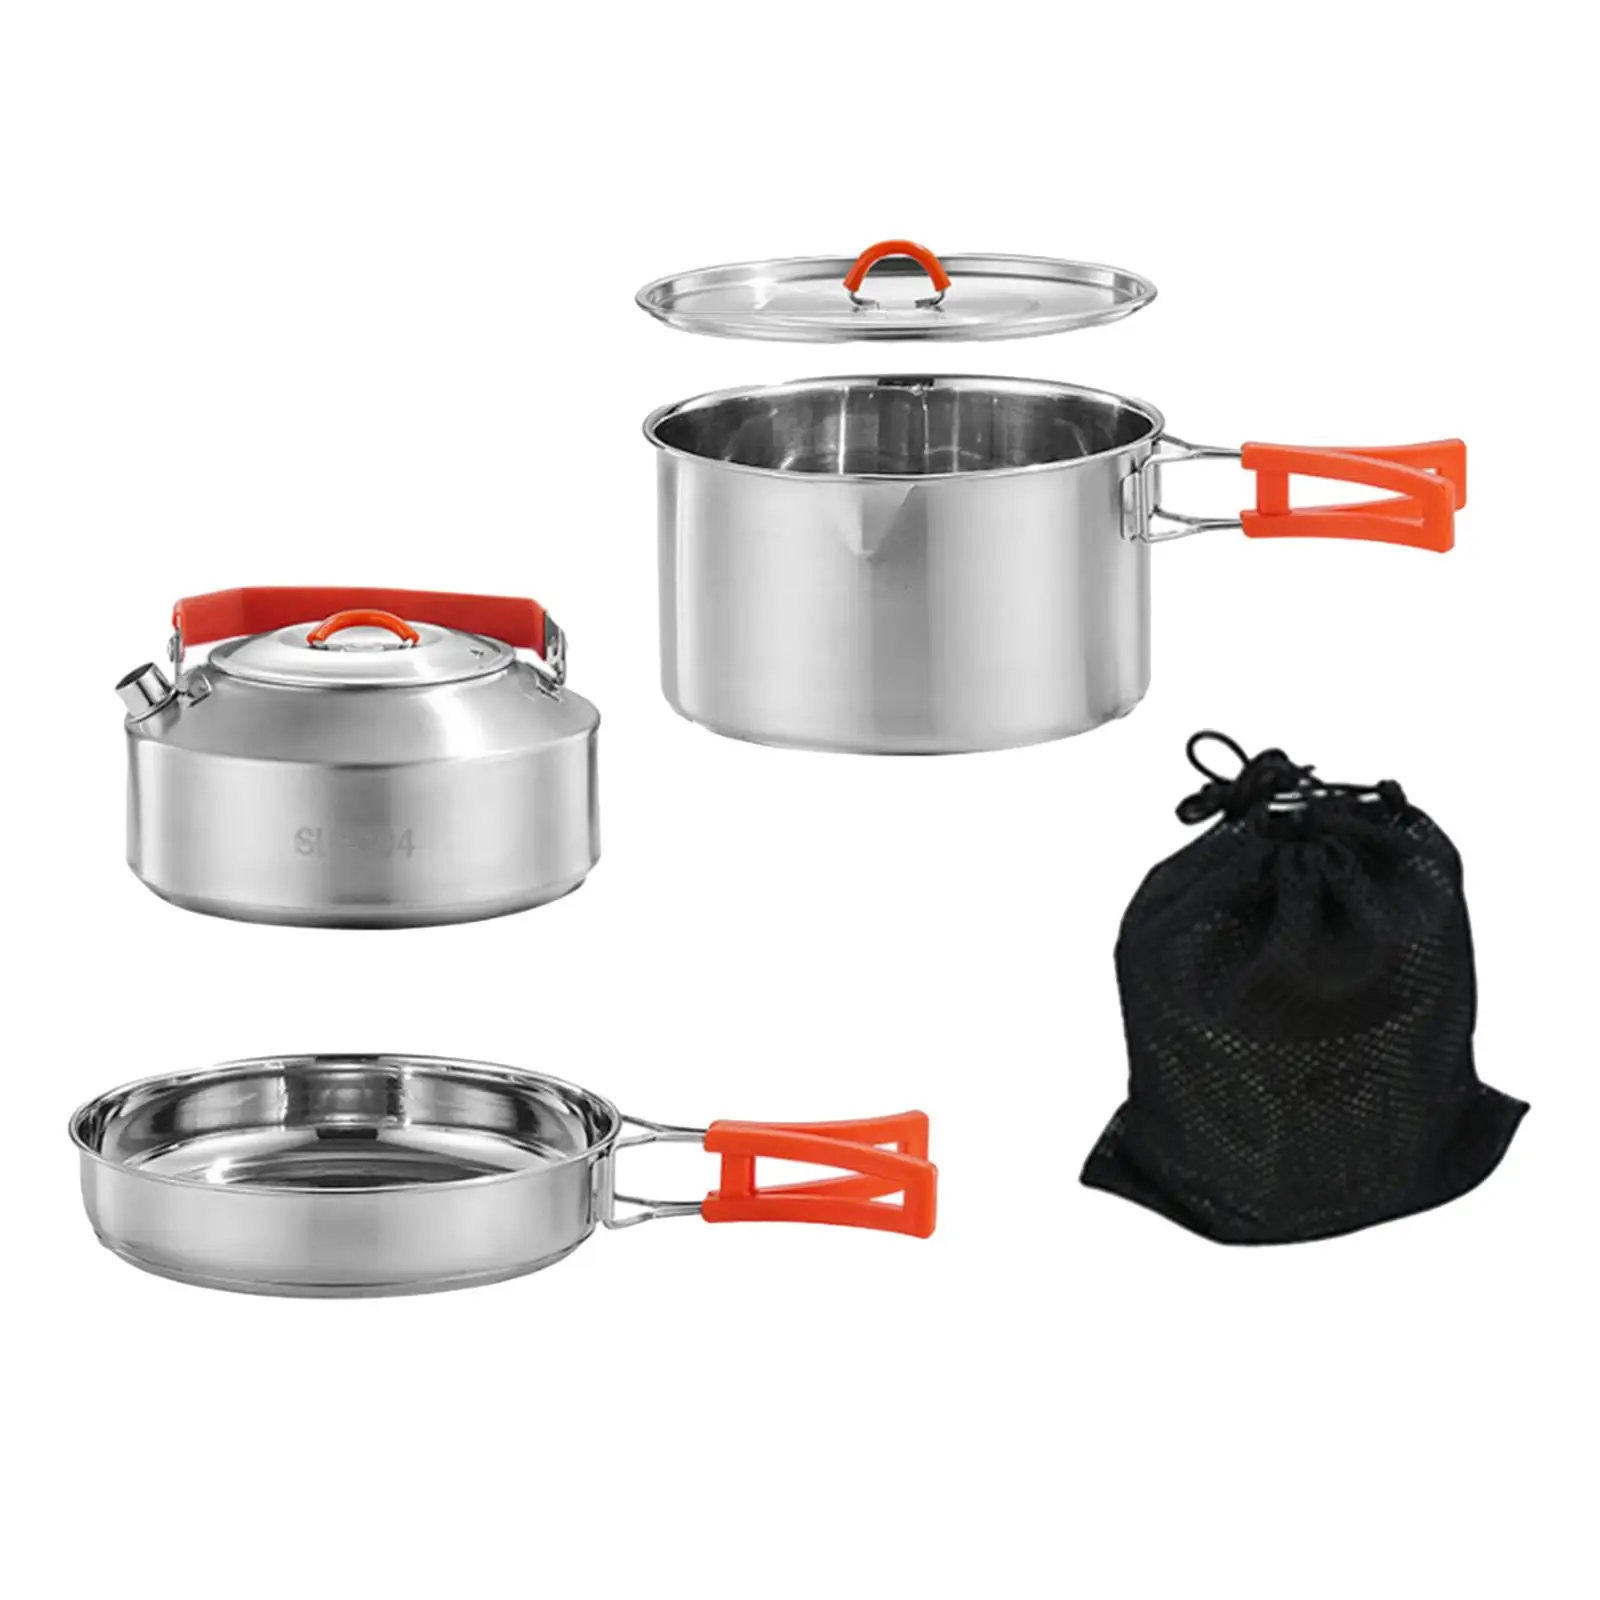 Camping Cookware Set Camping Cooking Set Lightweight Included Mesh Carry Bag